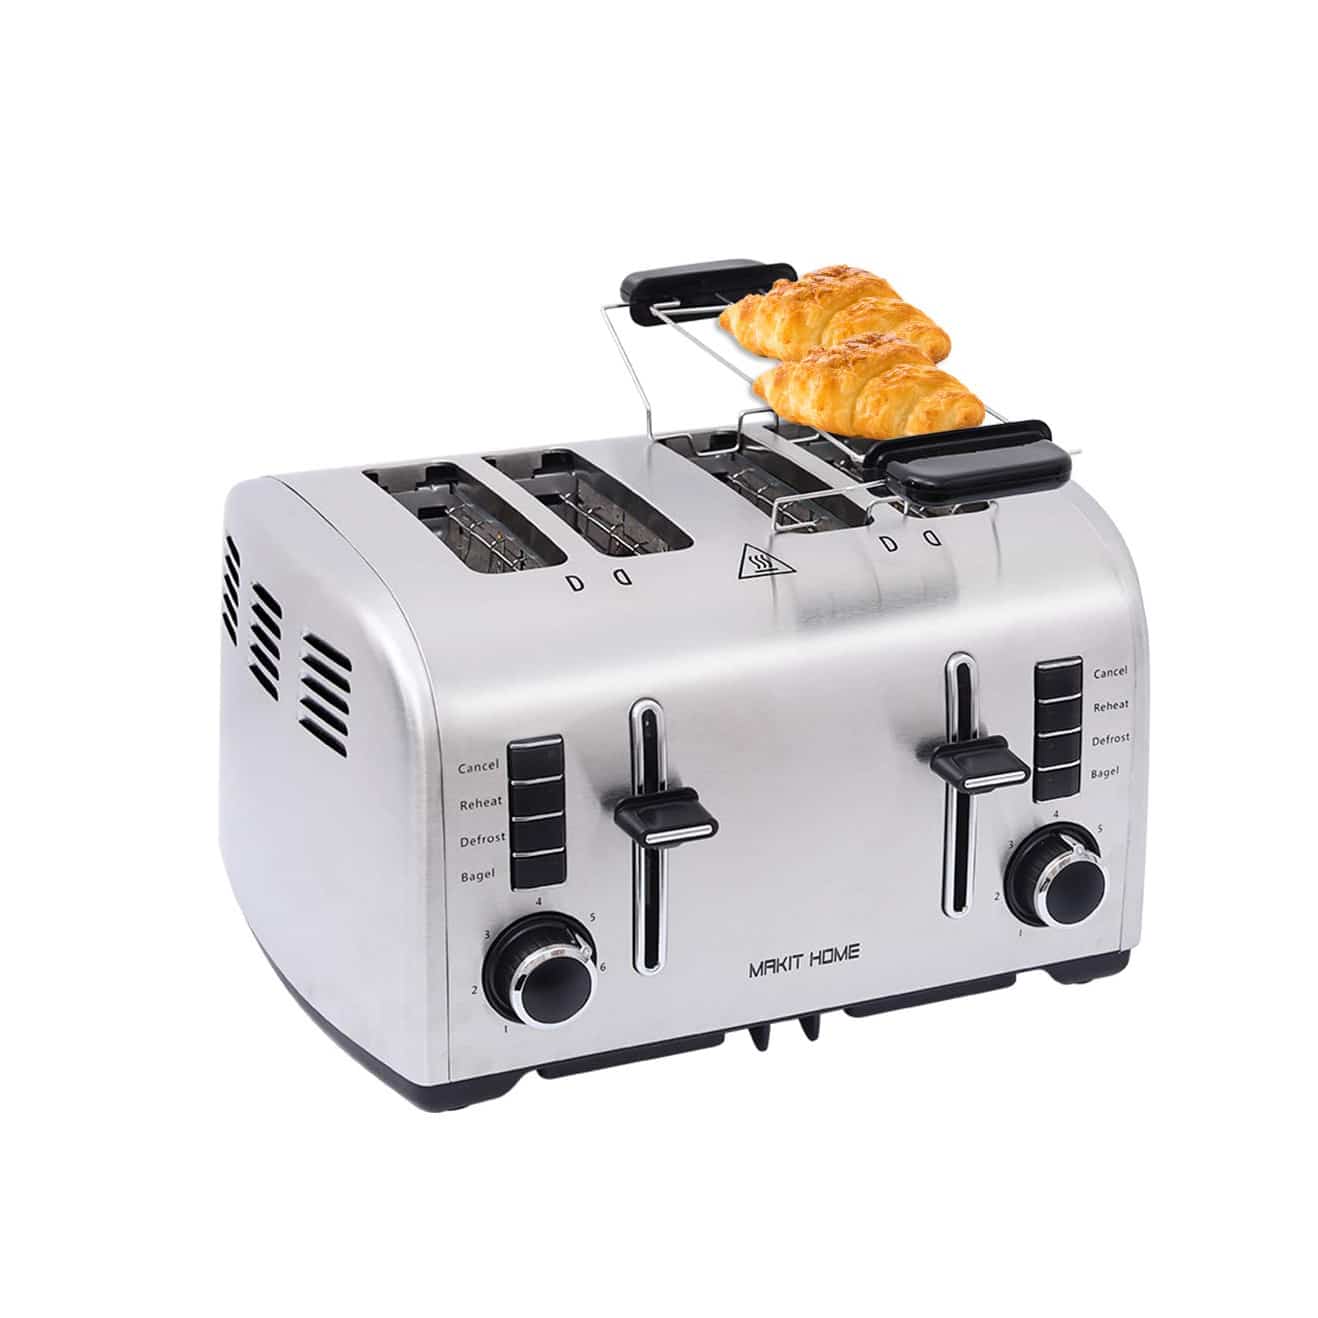 Top 10 Best 4 Slice Toaster in 2021 Reviews Guide